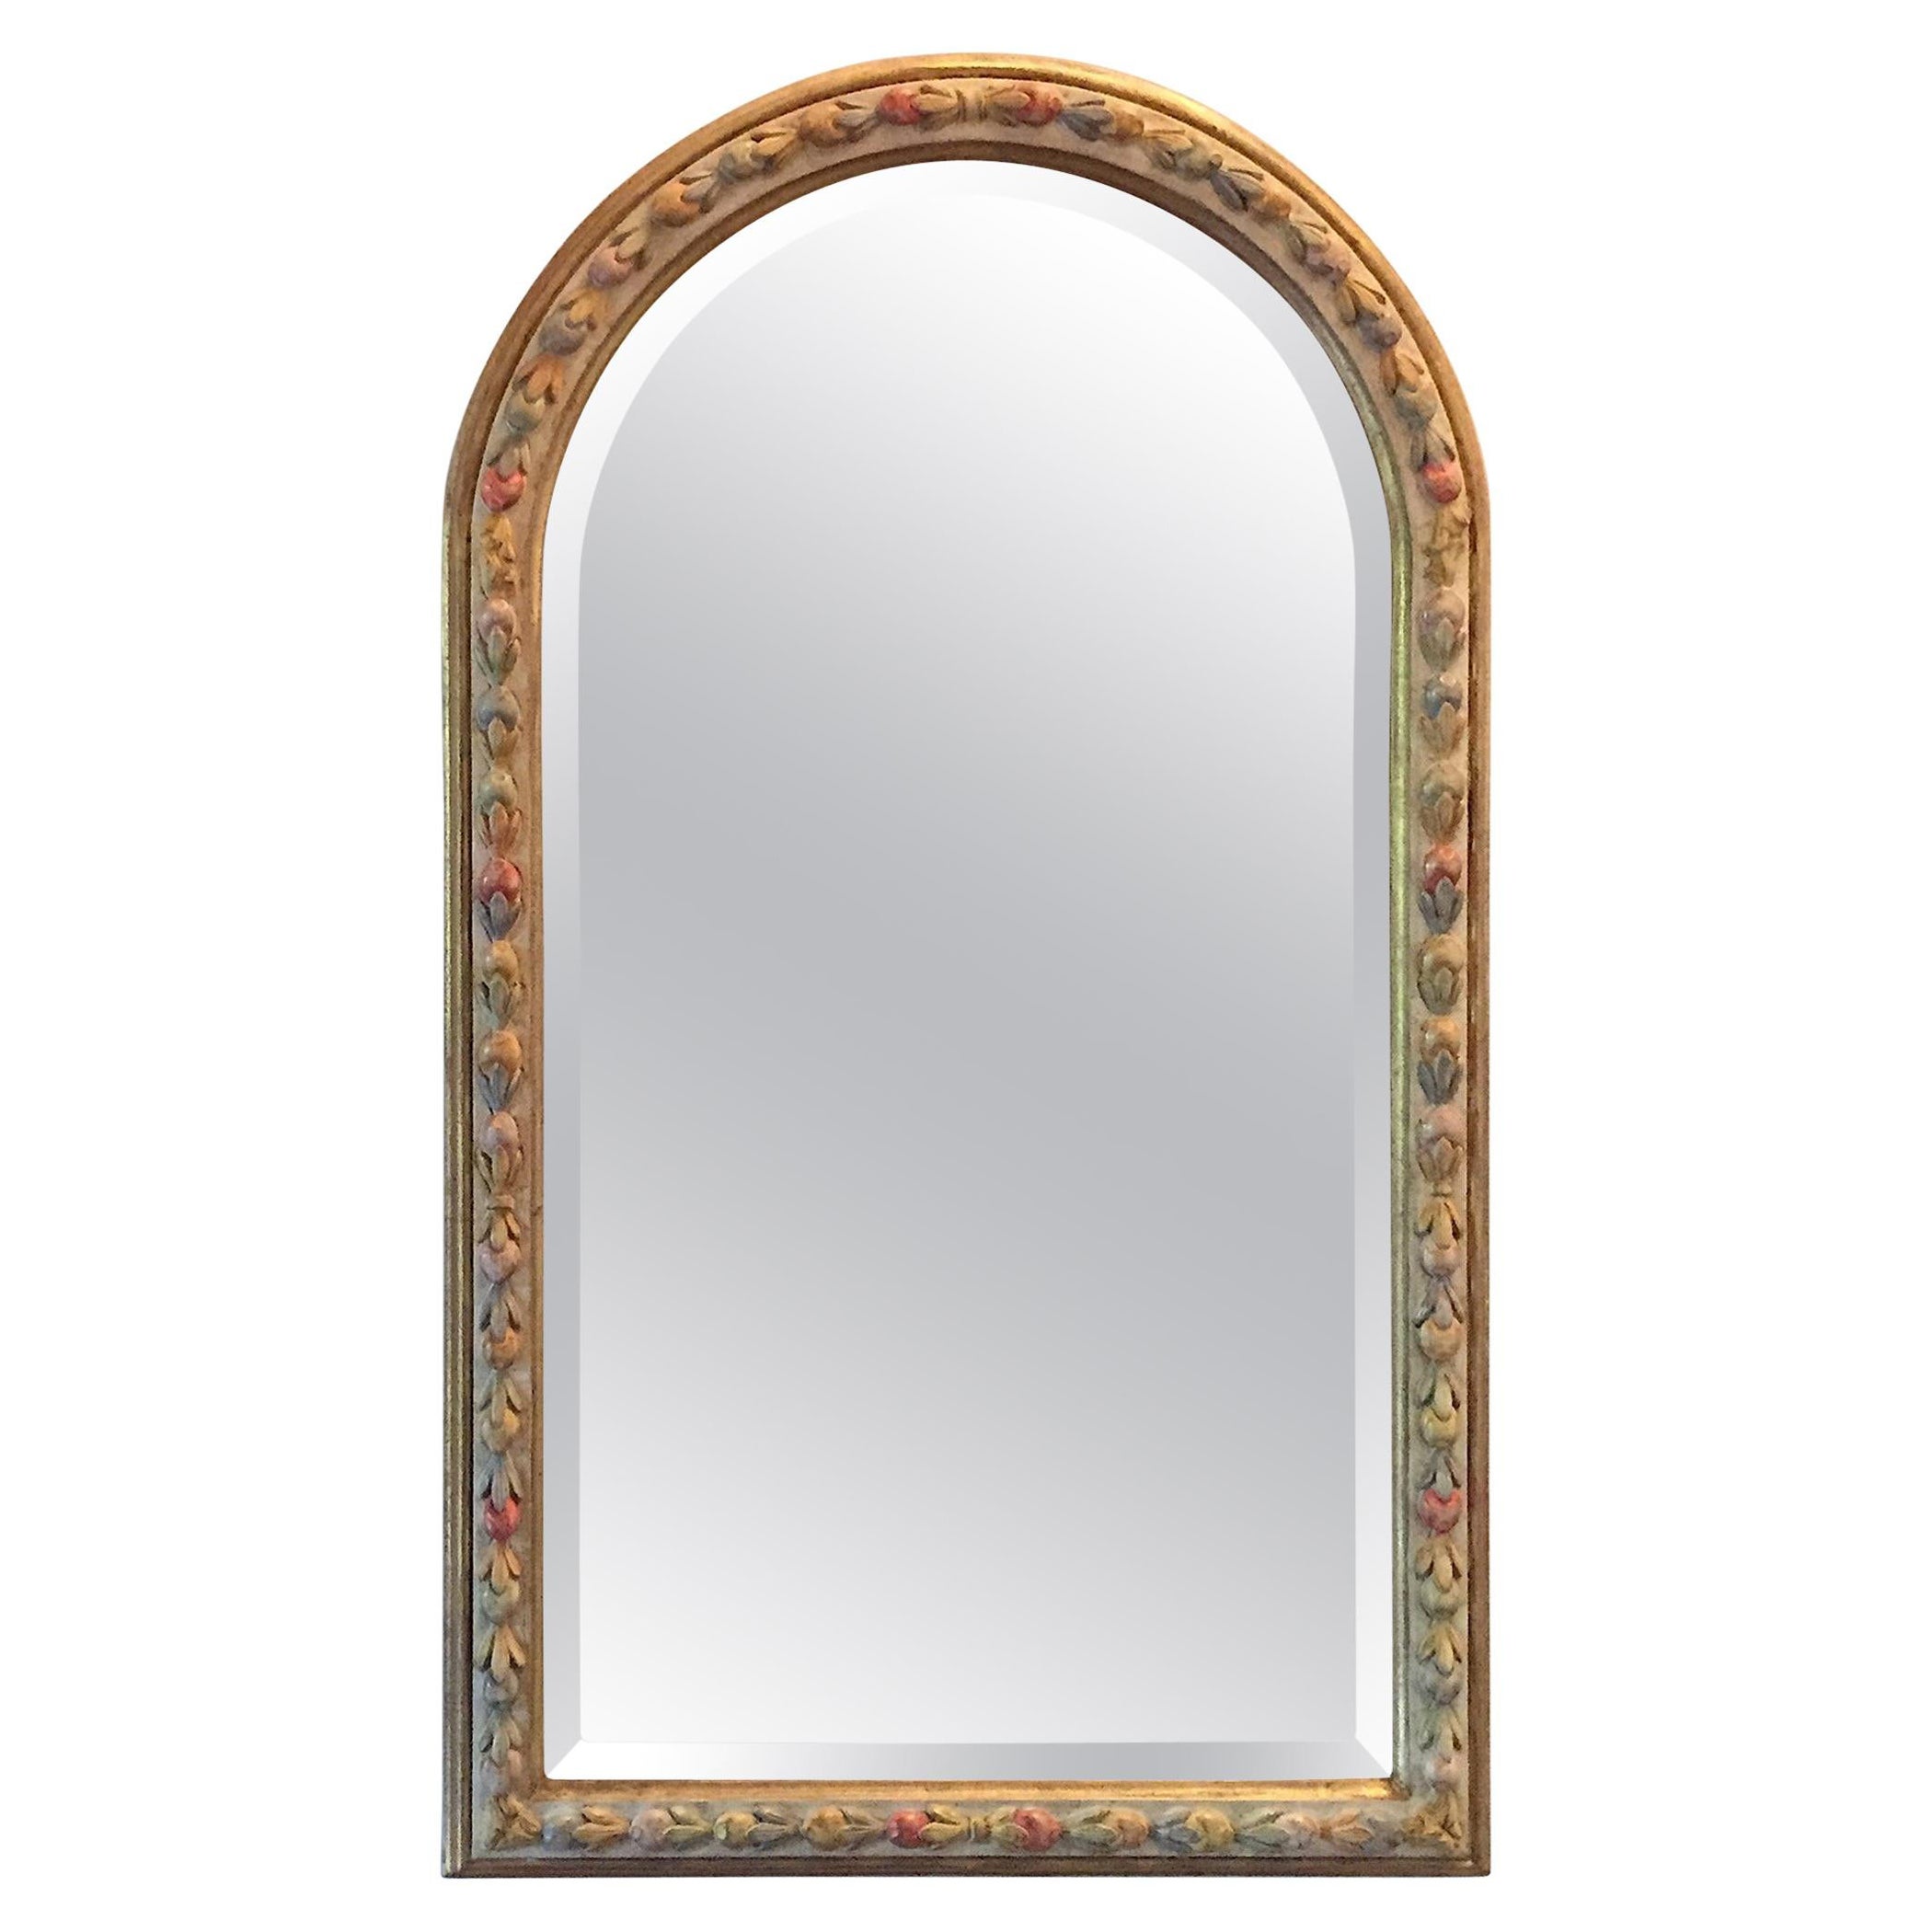 Italian Florentine Mirror by Chelini Painted Fruit Carving Decoration, 1980s